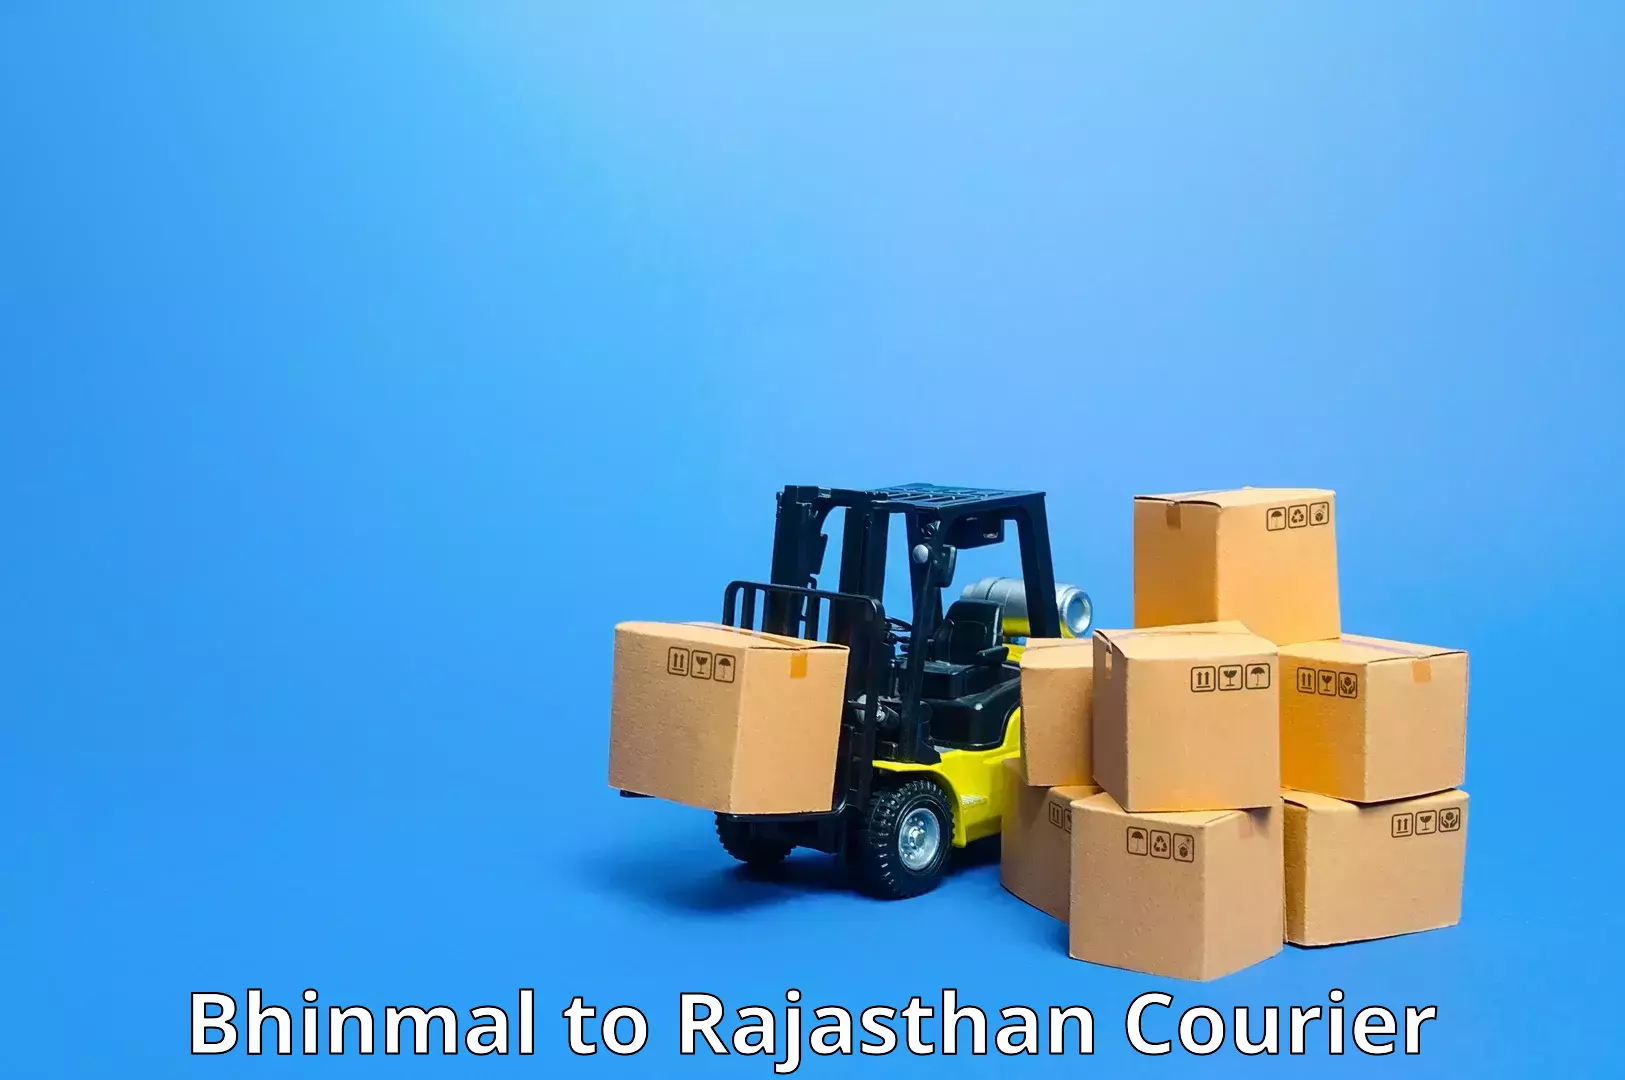 Parcel delivery automation Bhinmal to Mathania